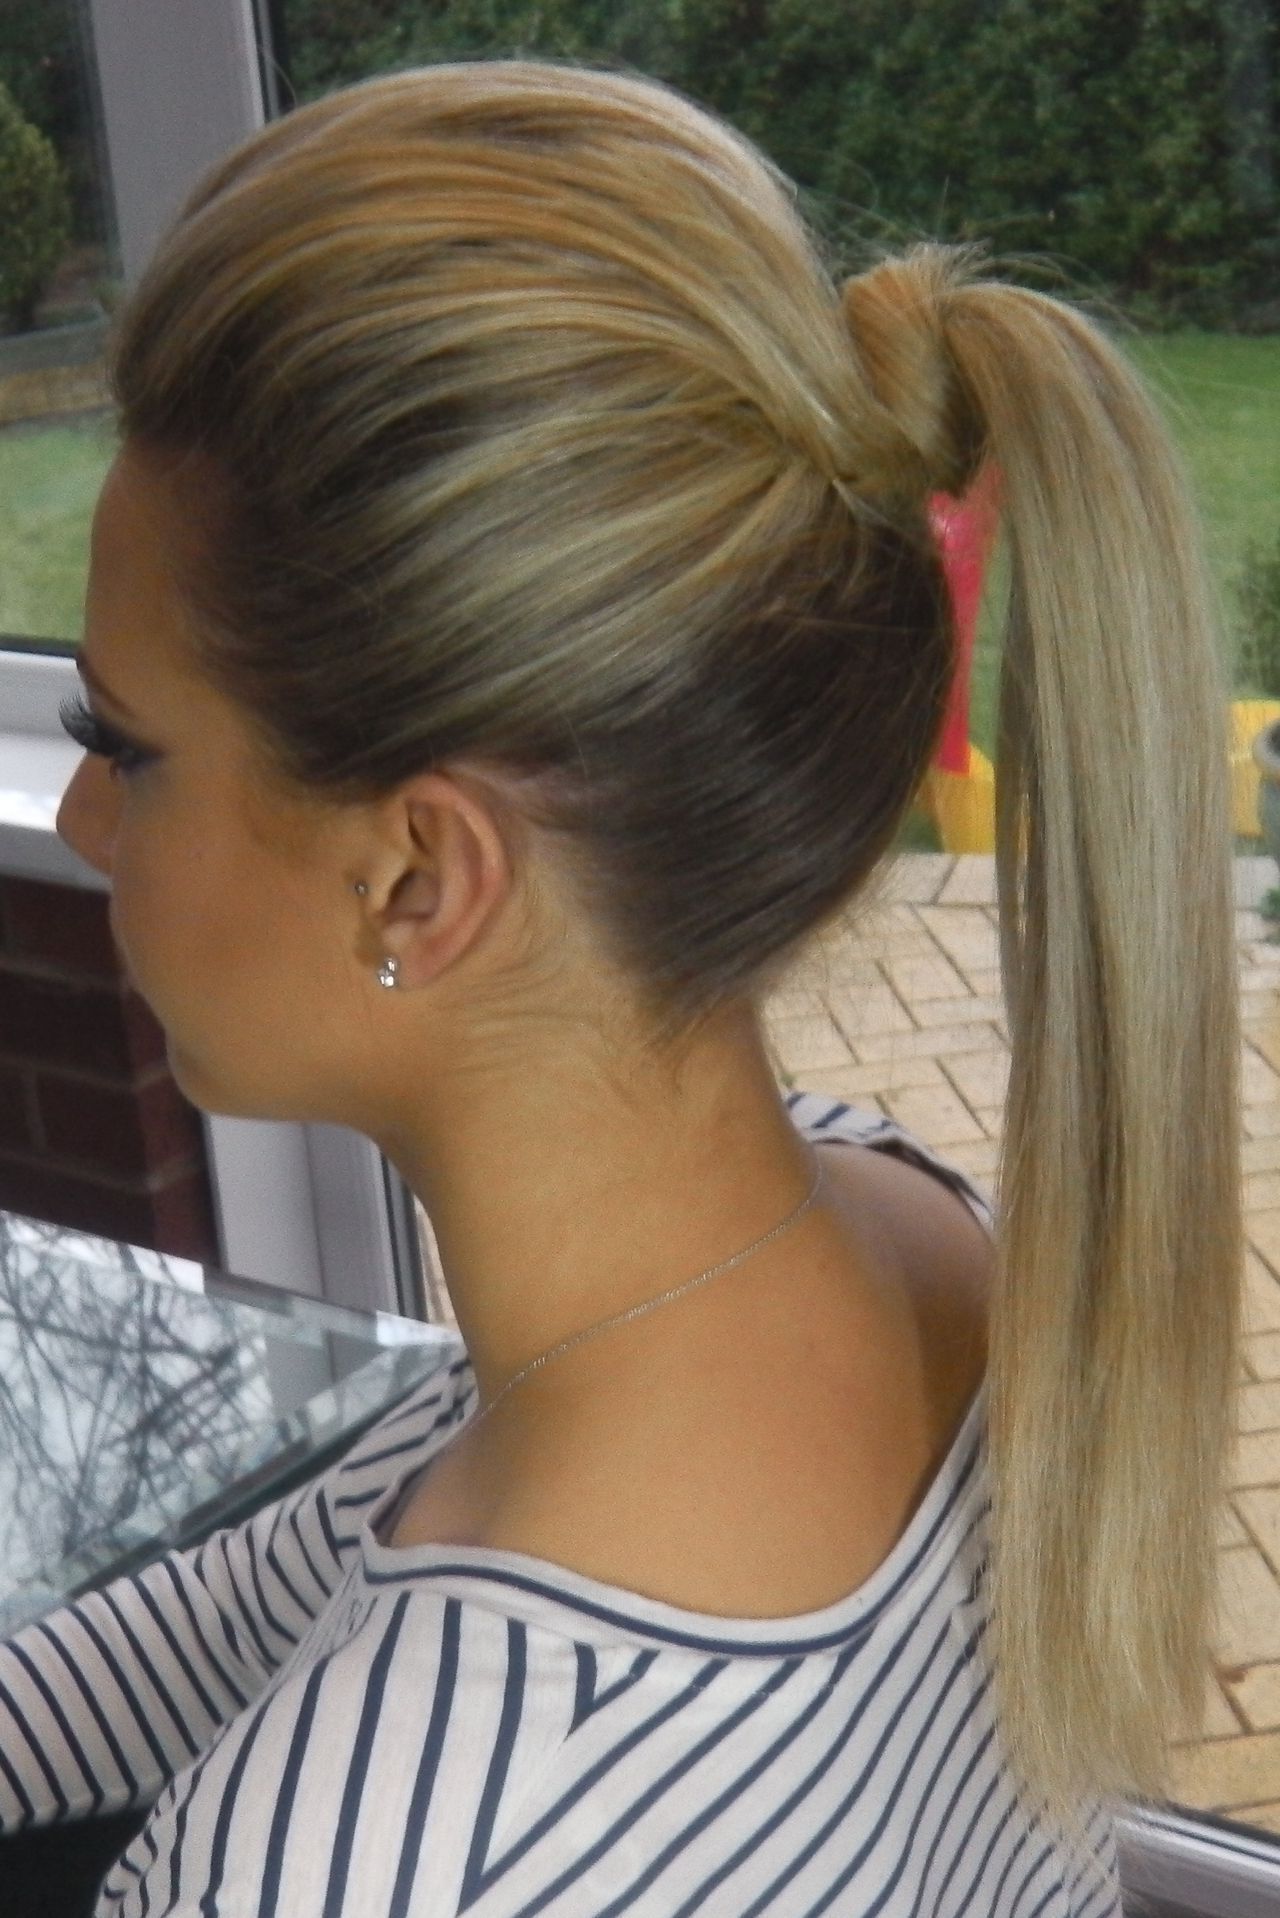 The "barbie Ponytail" – The Knot Lifting The Pony & Volume Up Top Pertaining To Most Current Chic Ponytail Hairstyles With Added Volume (View 4 of 20)